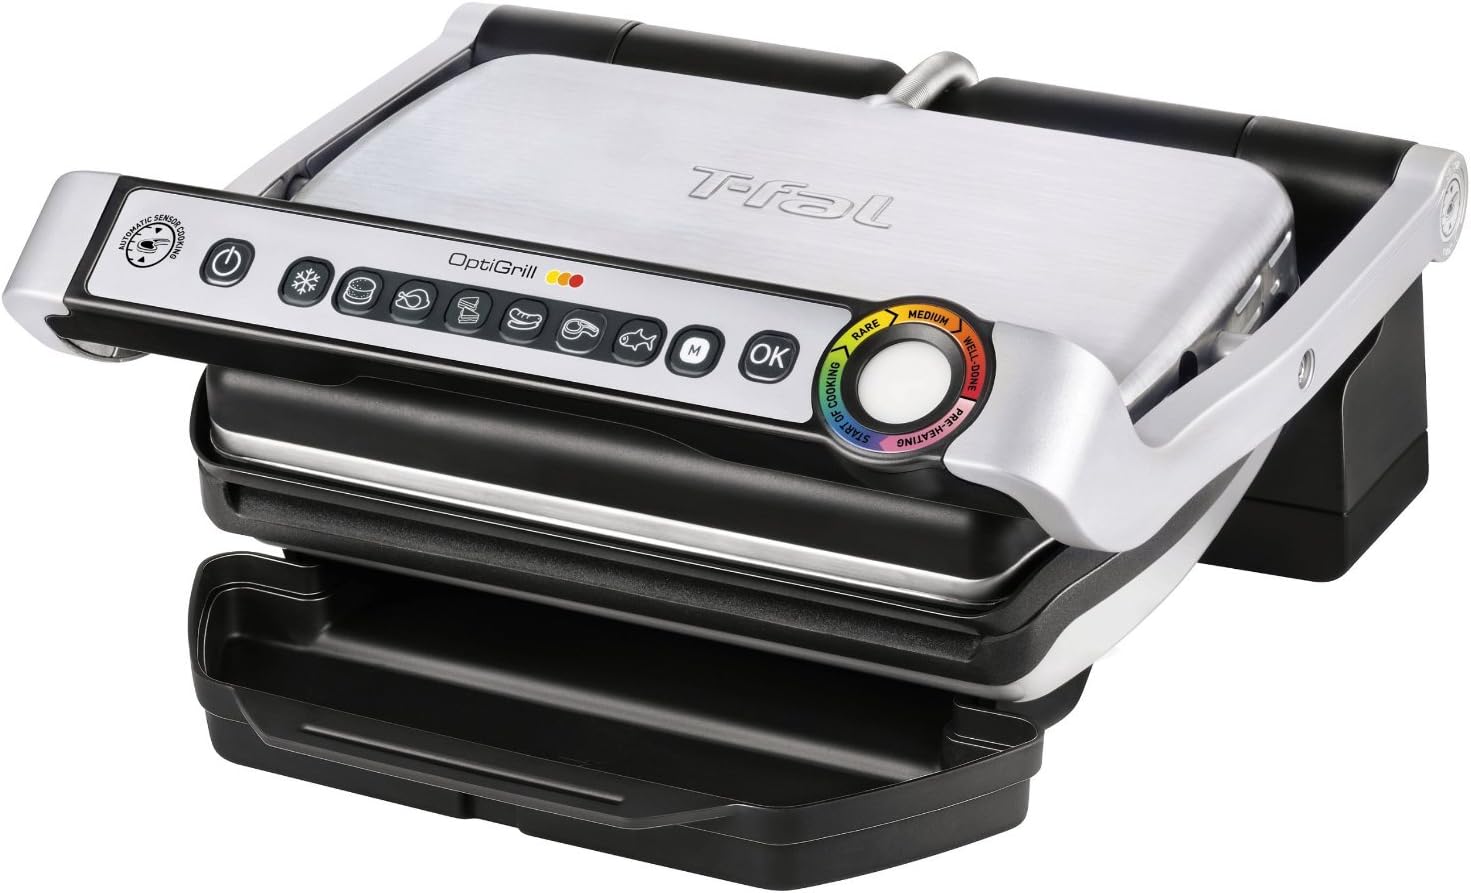 OptiGrill Stainless Steel Electric Grill 4 Servings 6 Automatic Cooking Modes, Intelligent grilling rare to well-done 1800 Watts Nonstick Removable Plates, Dishwasher Safe, Indoor, Silver